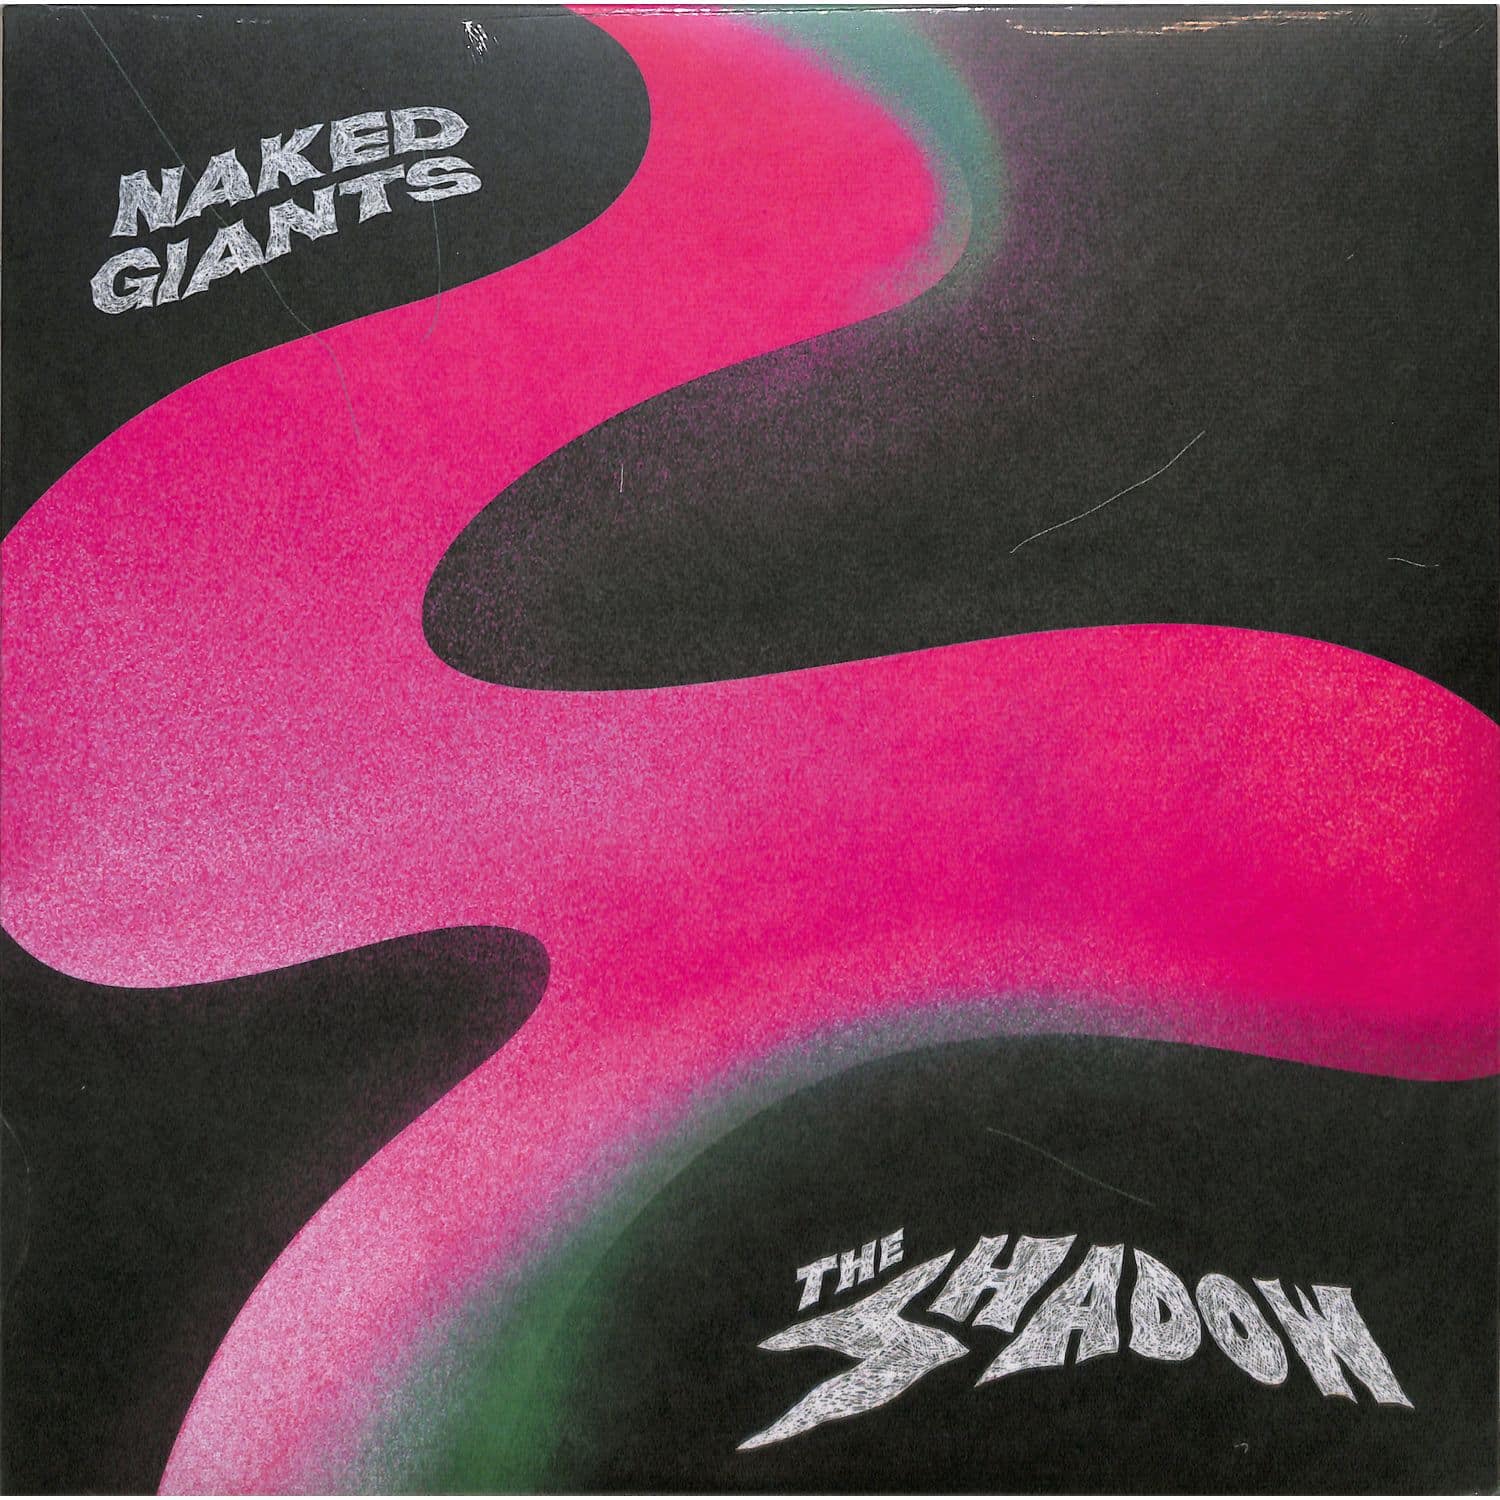 Naked Giants - THE SHADOW 